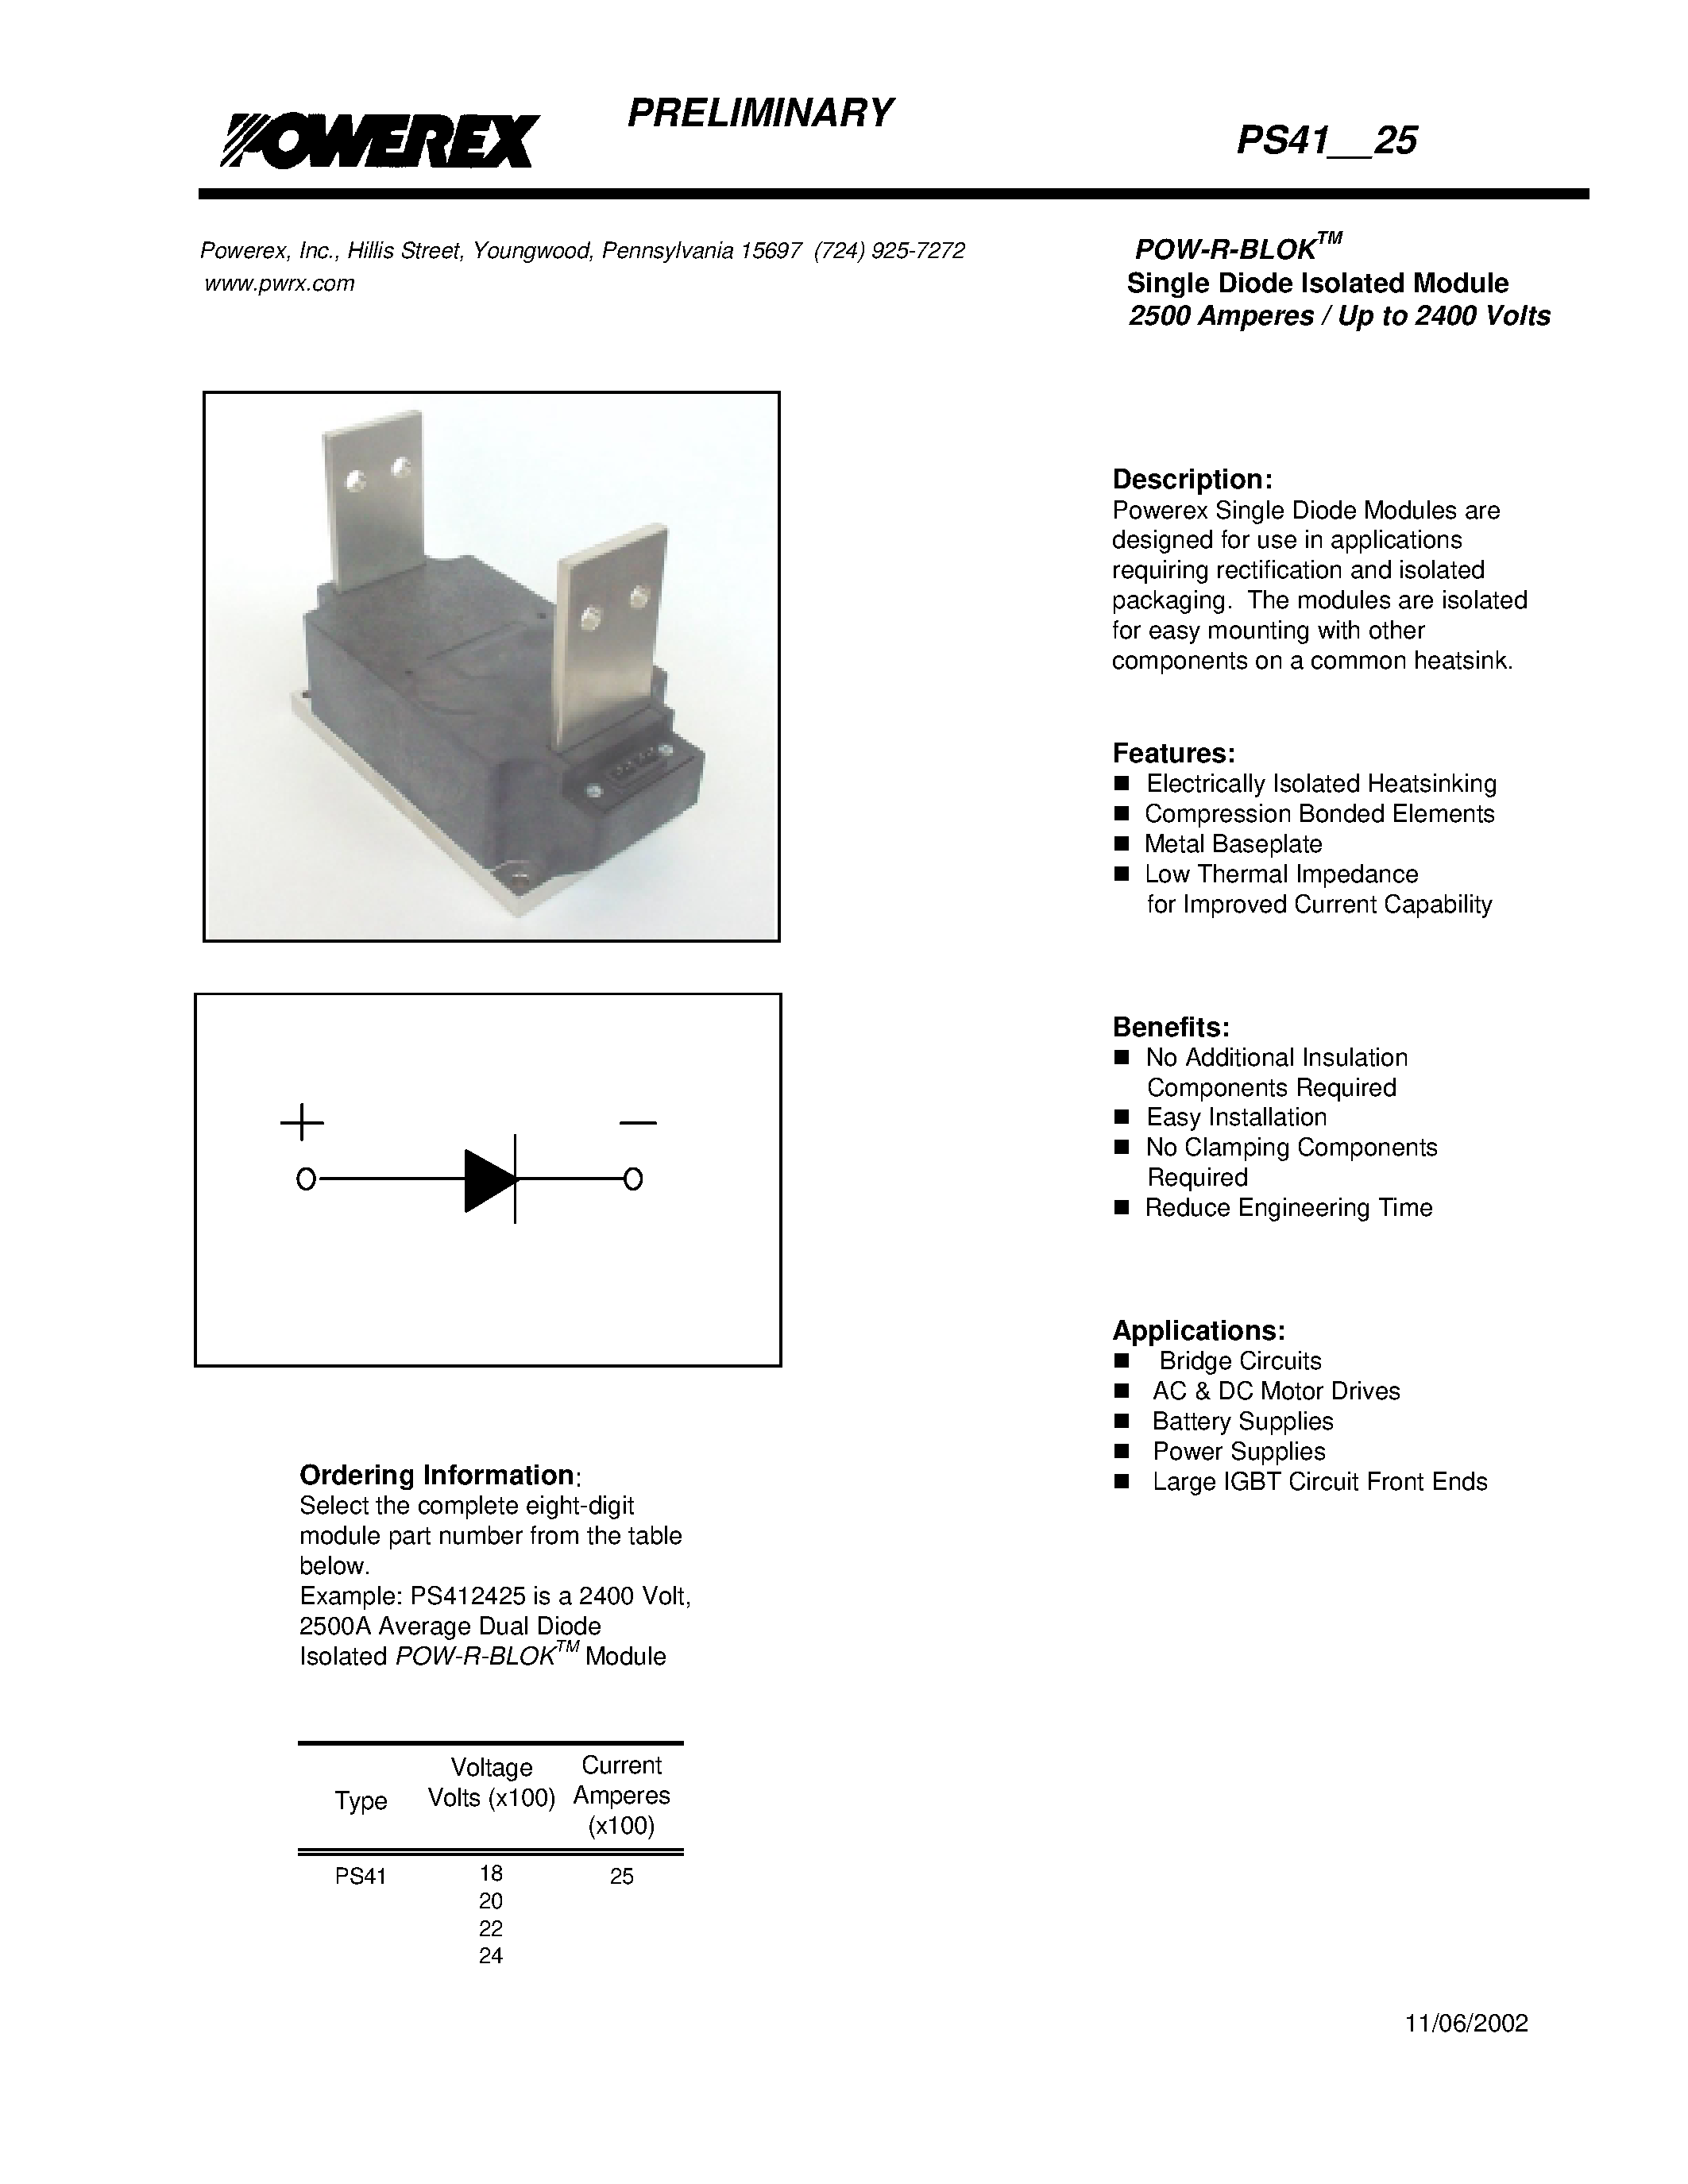 Datasheet P412025 - POW-R-BLOK Single Diode Isolated Module (2500 Amperes / Up to 2400 Volts) page 1